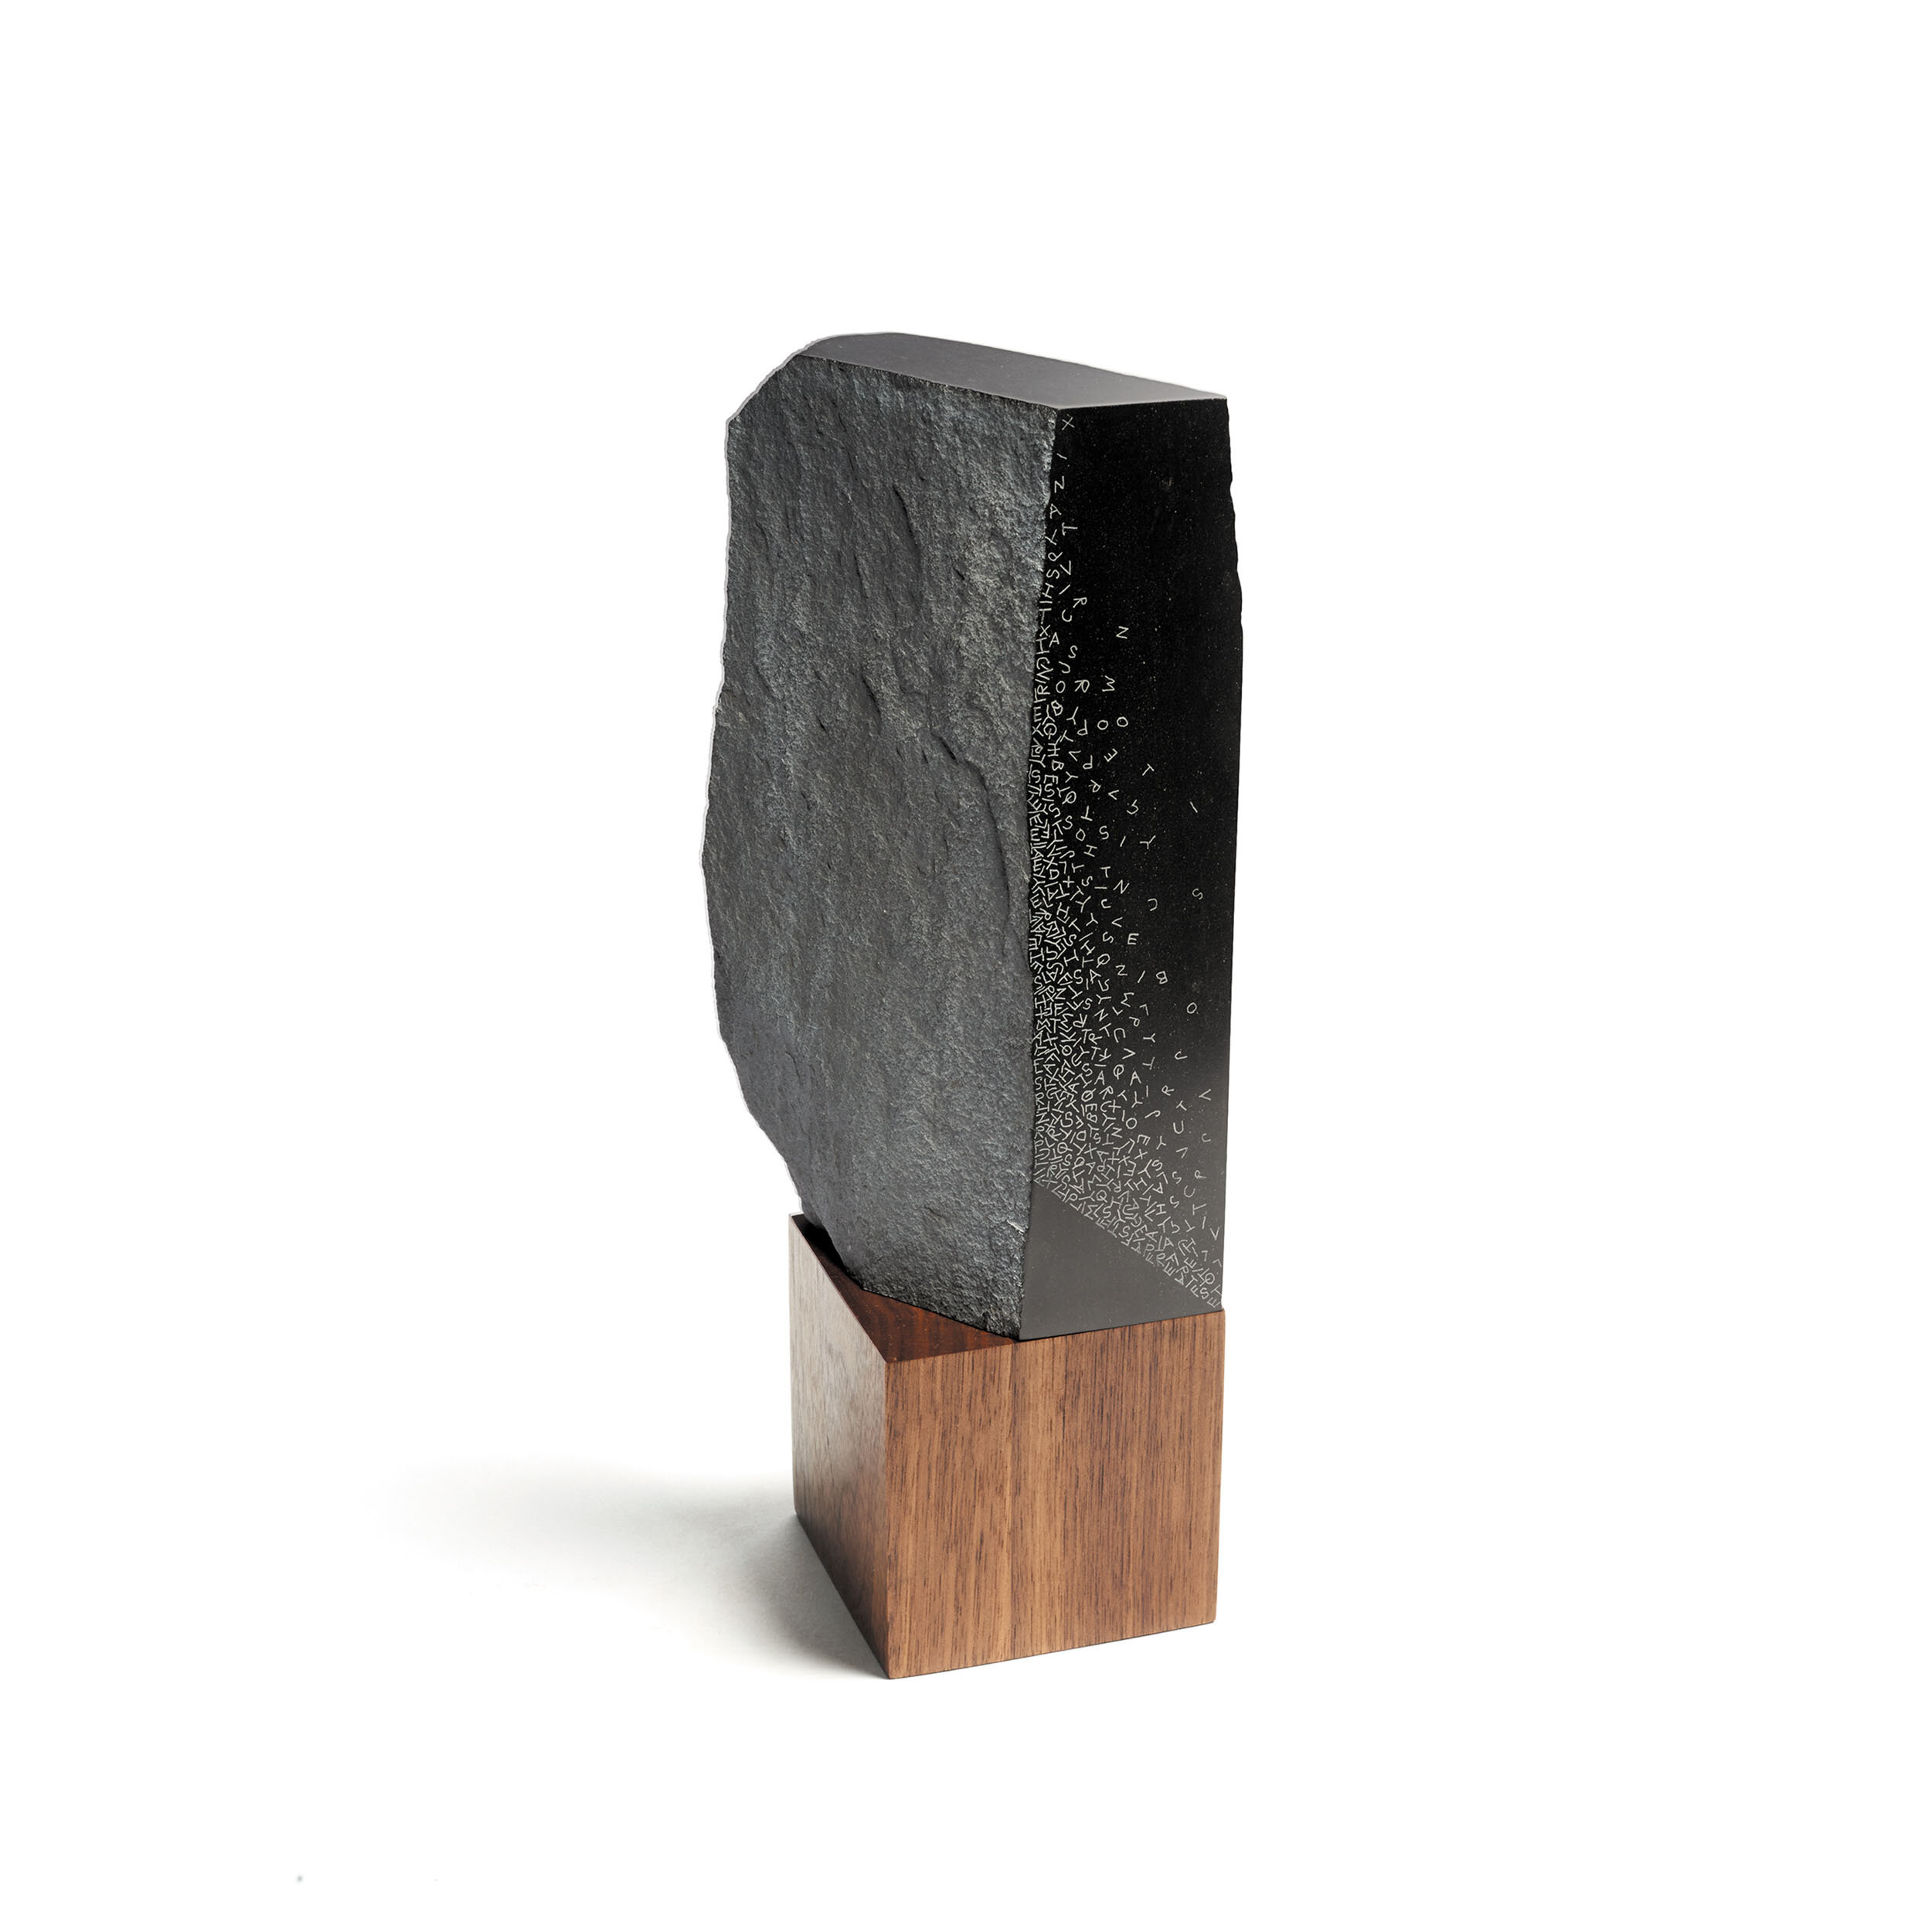   Passage II   2014 &nbsp; African pyrophyllite and wood  12” x 4½” x 3¼” 